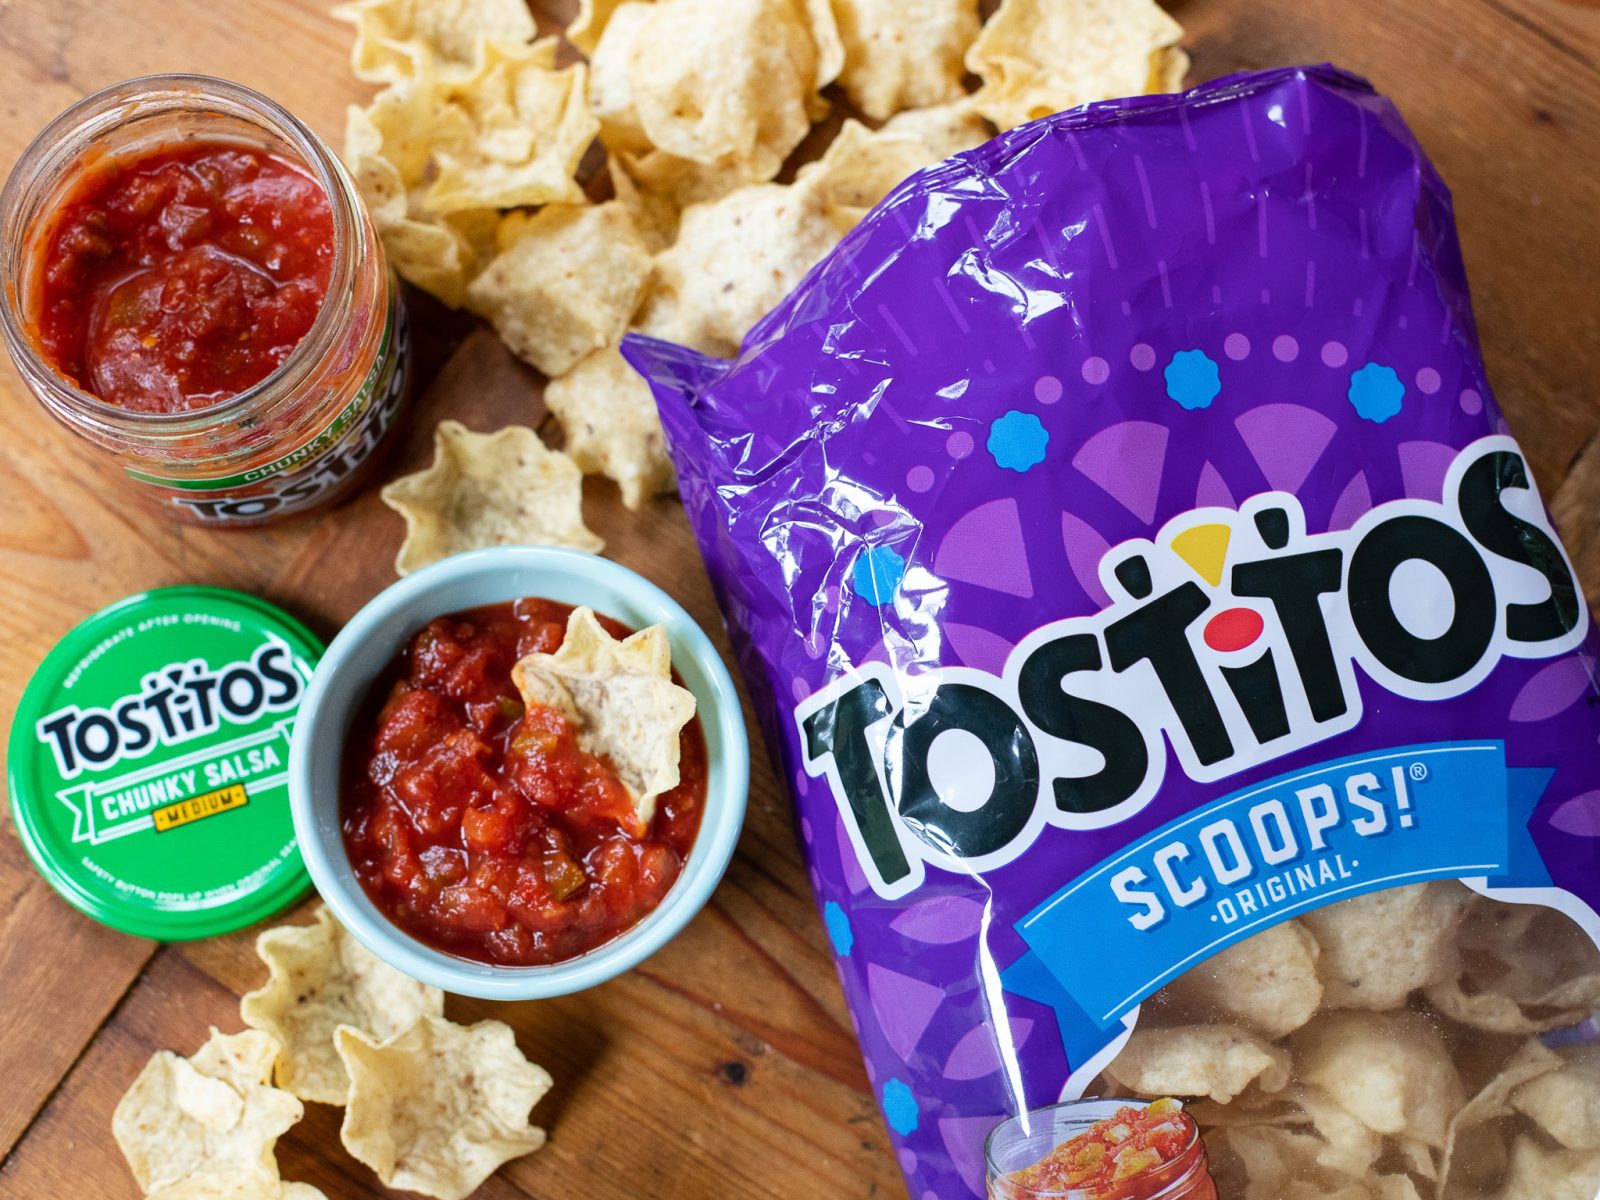 Grab Tostitos Chips As Low As $2.20 At Publix (Regular Price $5.59)